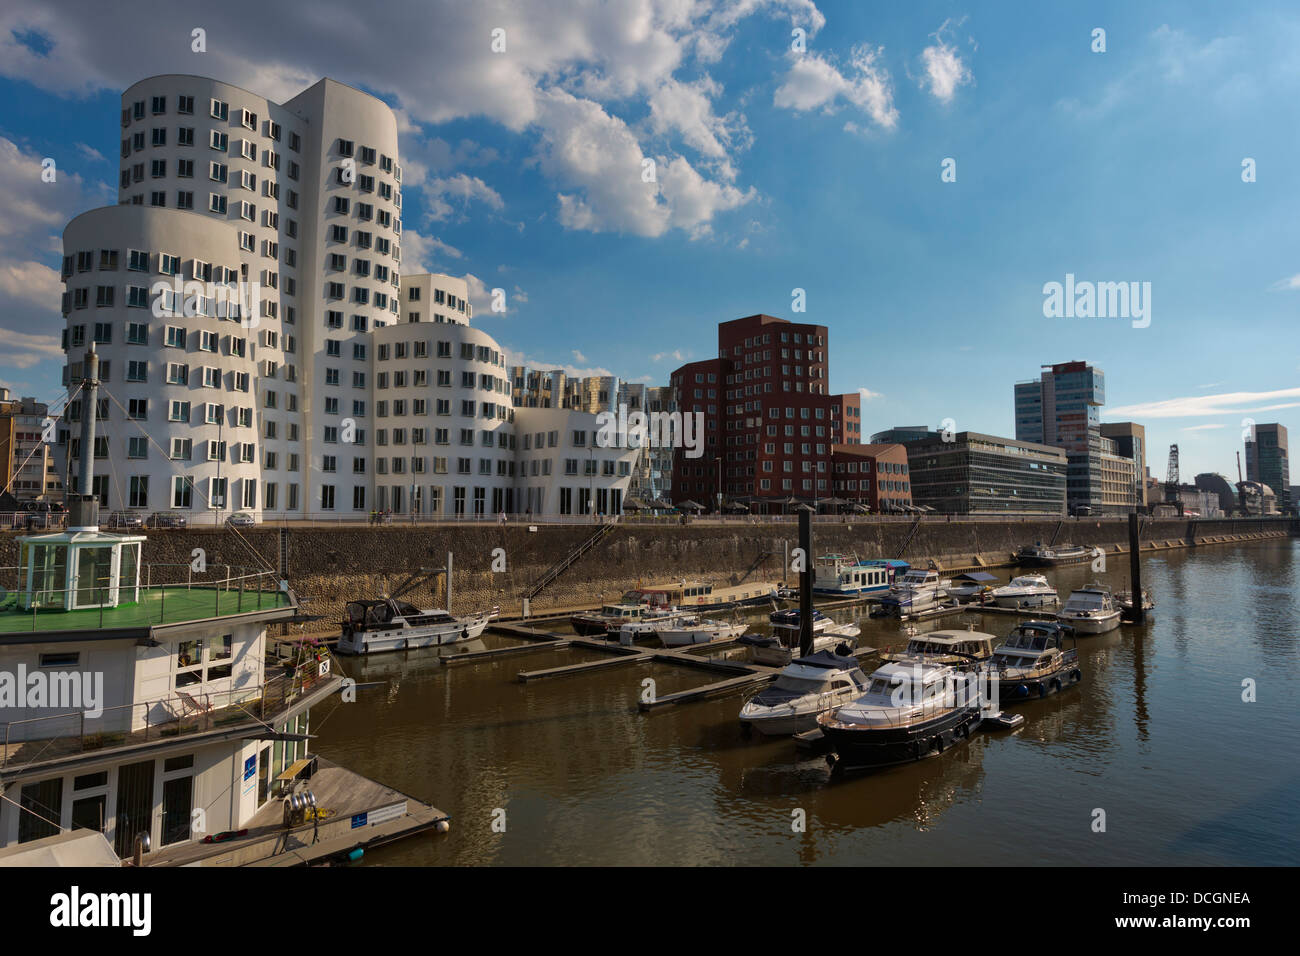 The 'Dancing Buildings' by Frank O Gehry at Medienhafen with the Düsseldorf Marina Stock Photo